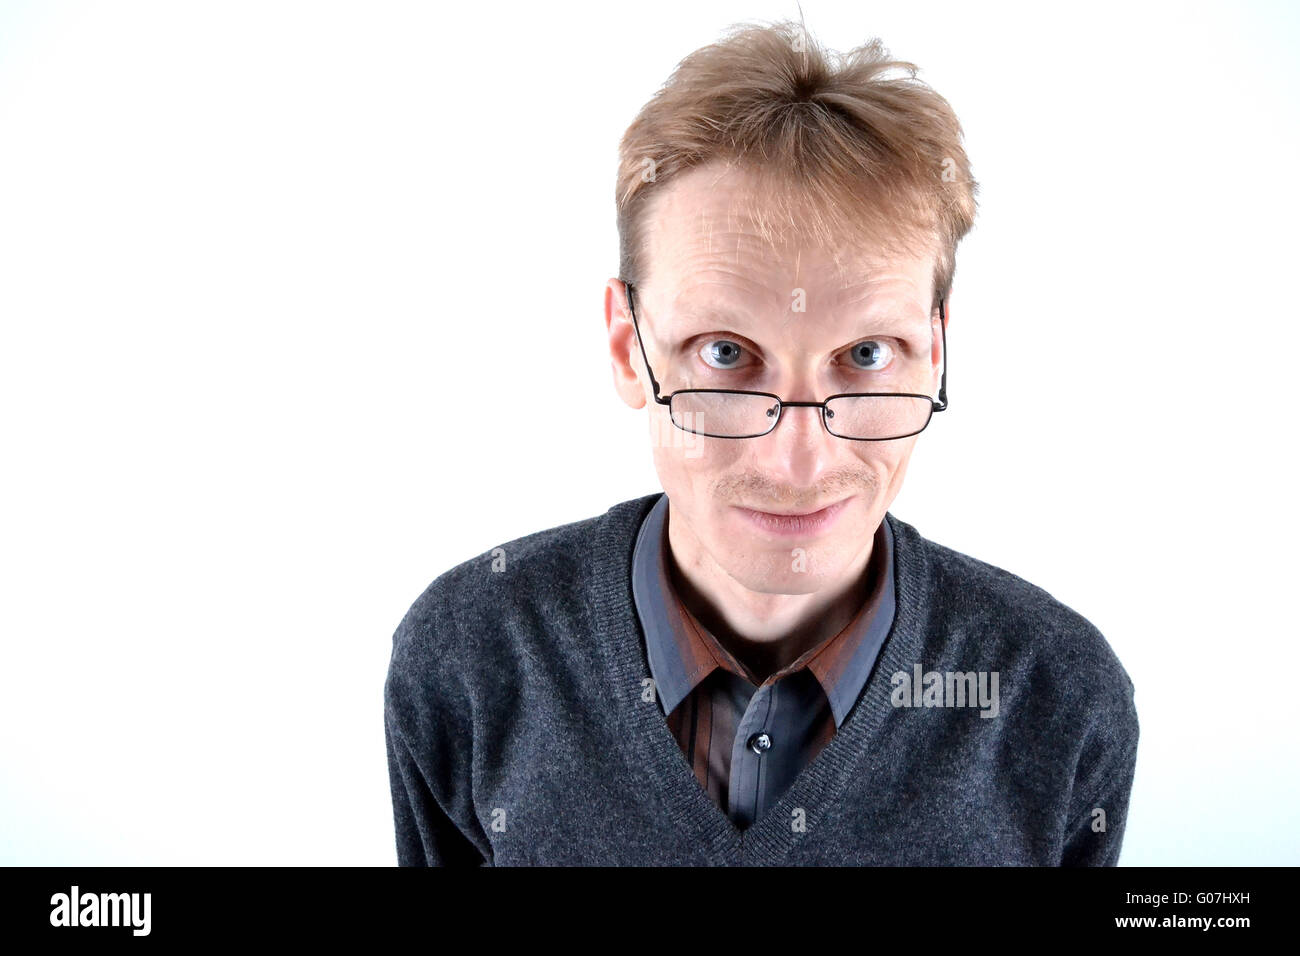 Blond man with glasses Stock Photo